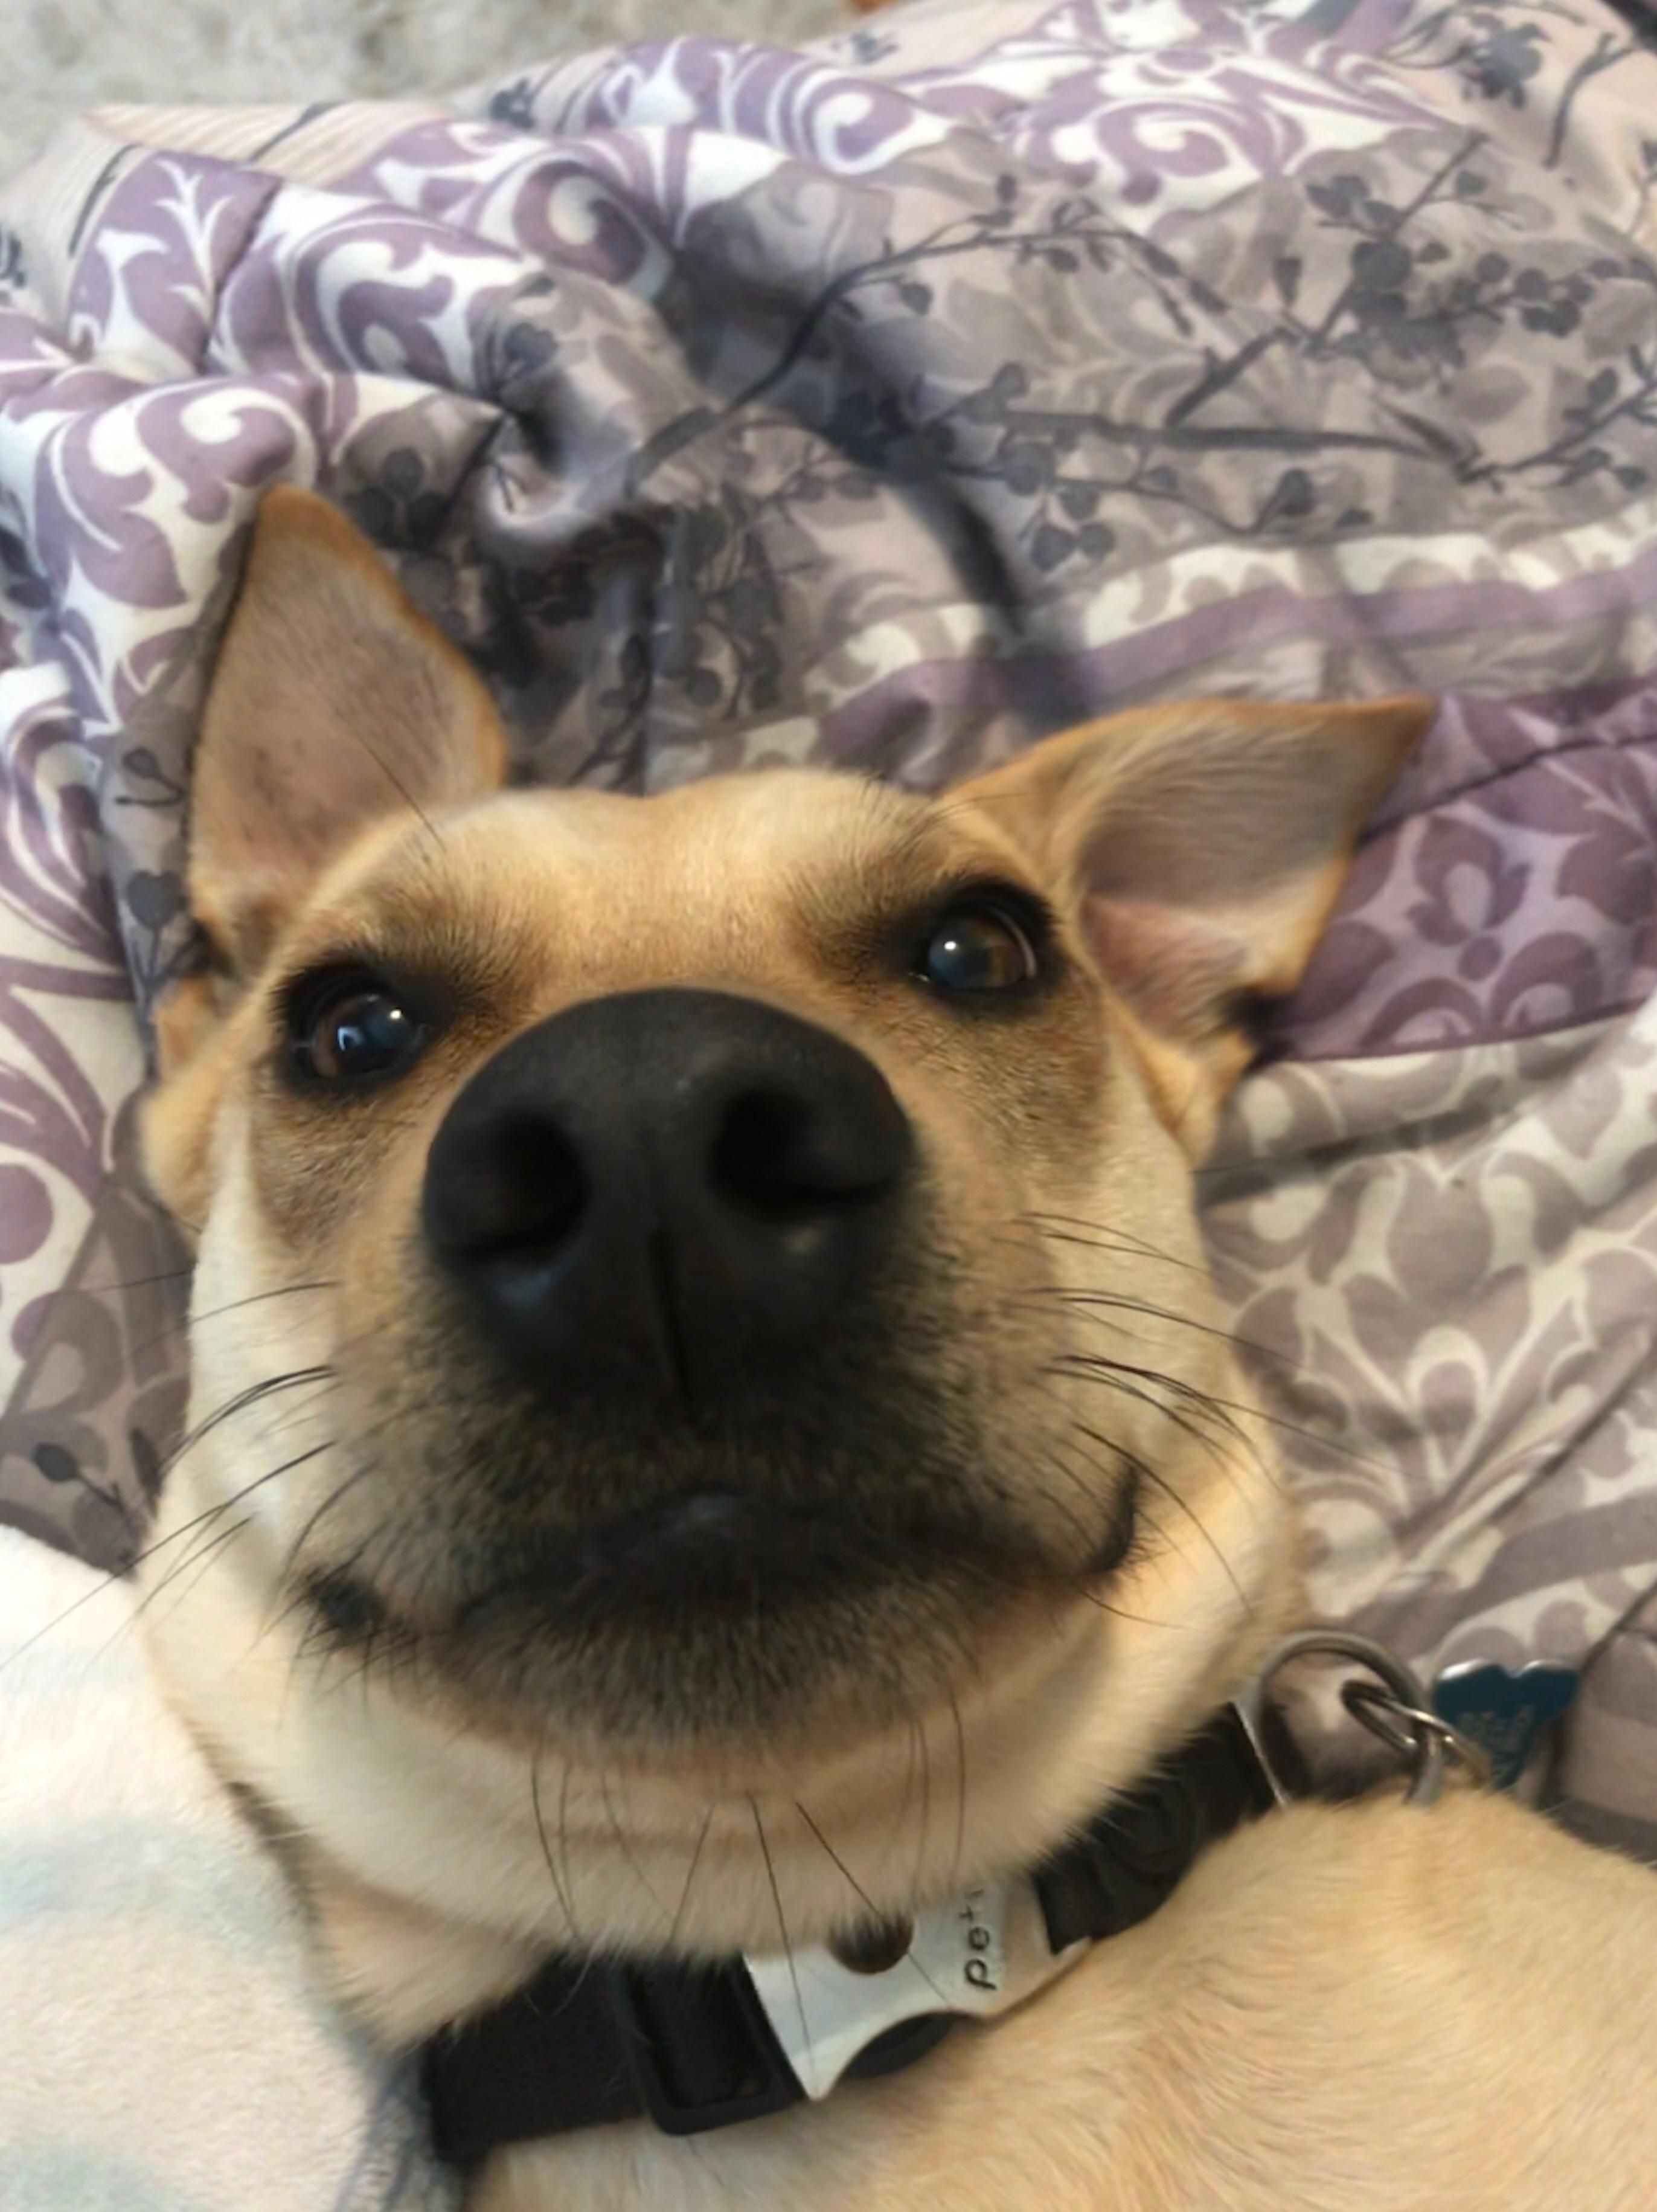 When you accidentally open the front facing camera and notice how cute you look today